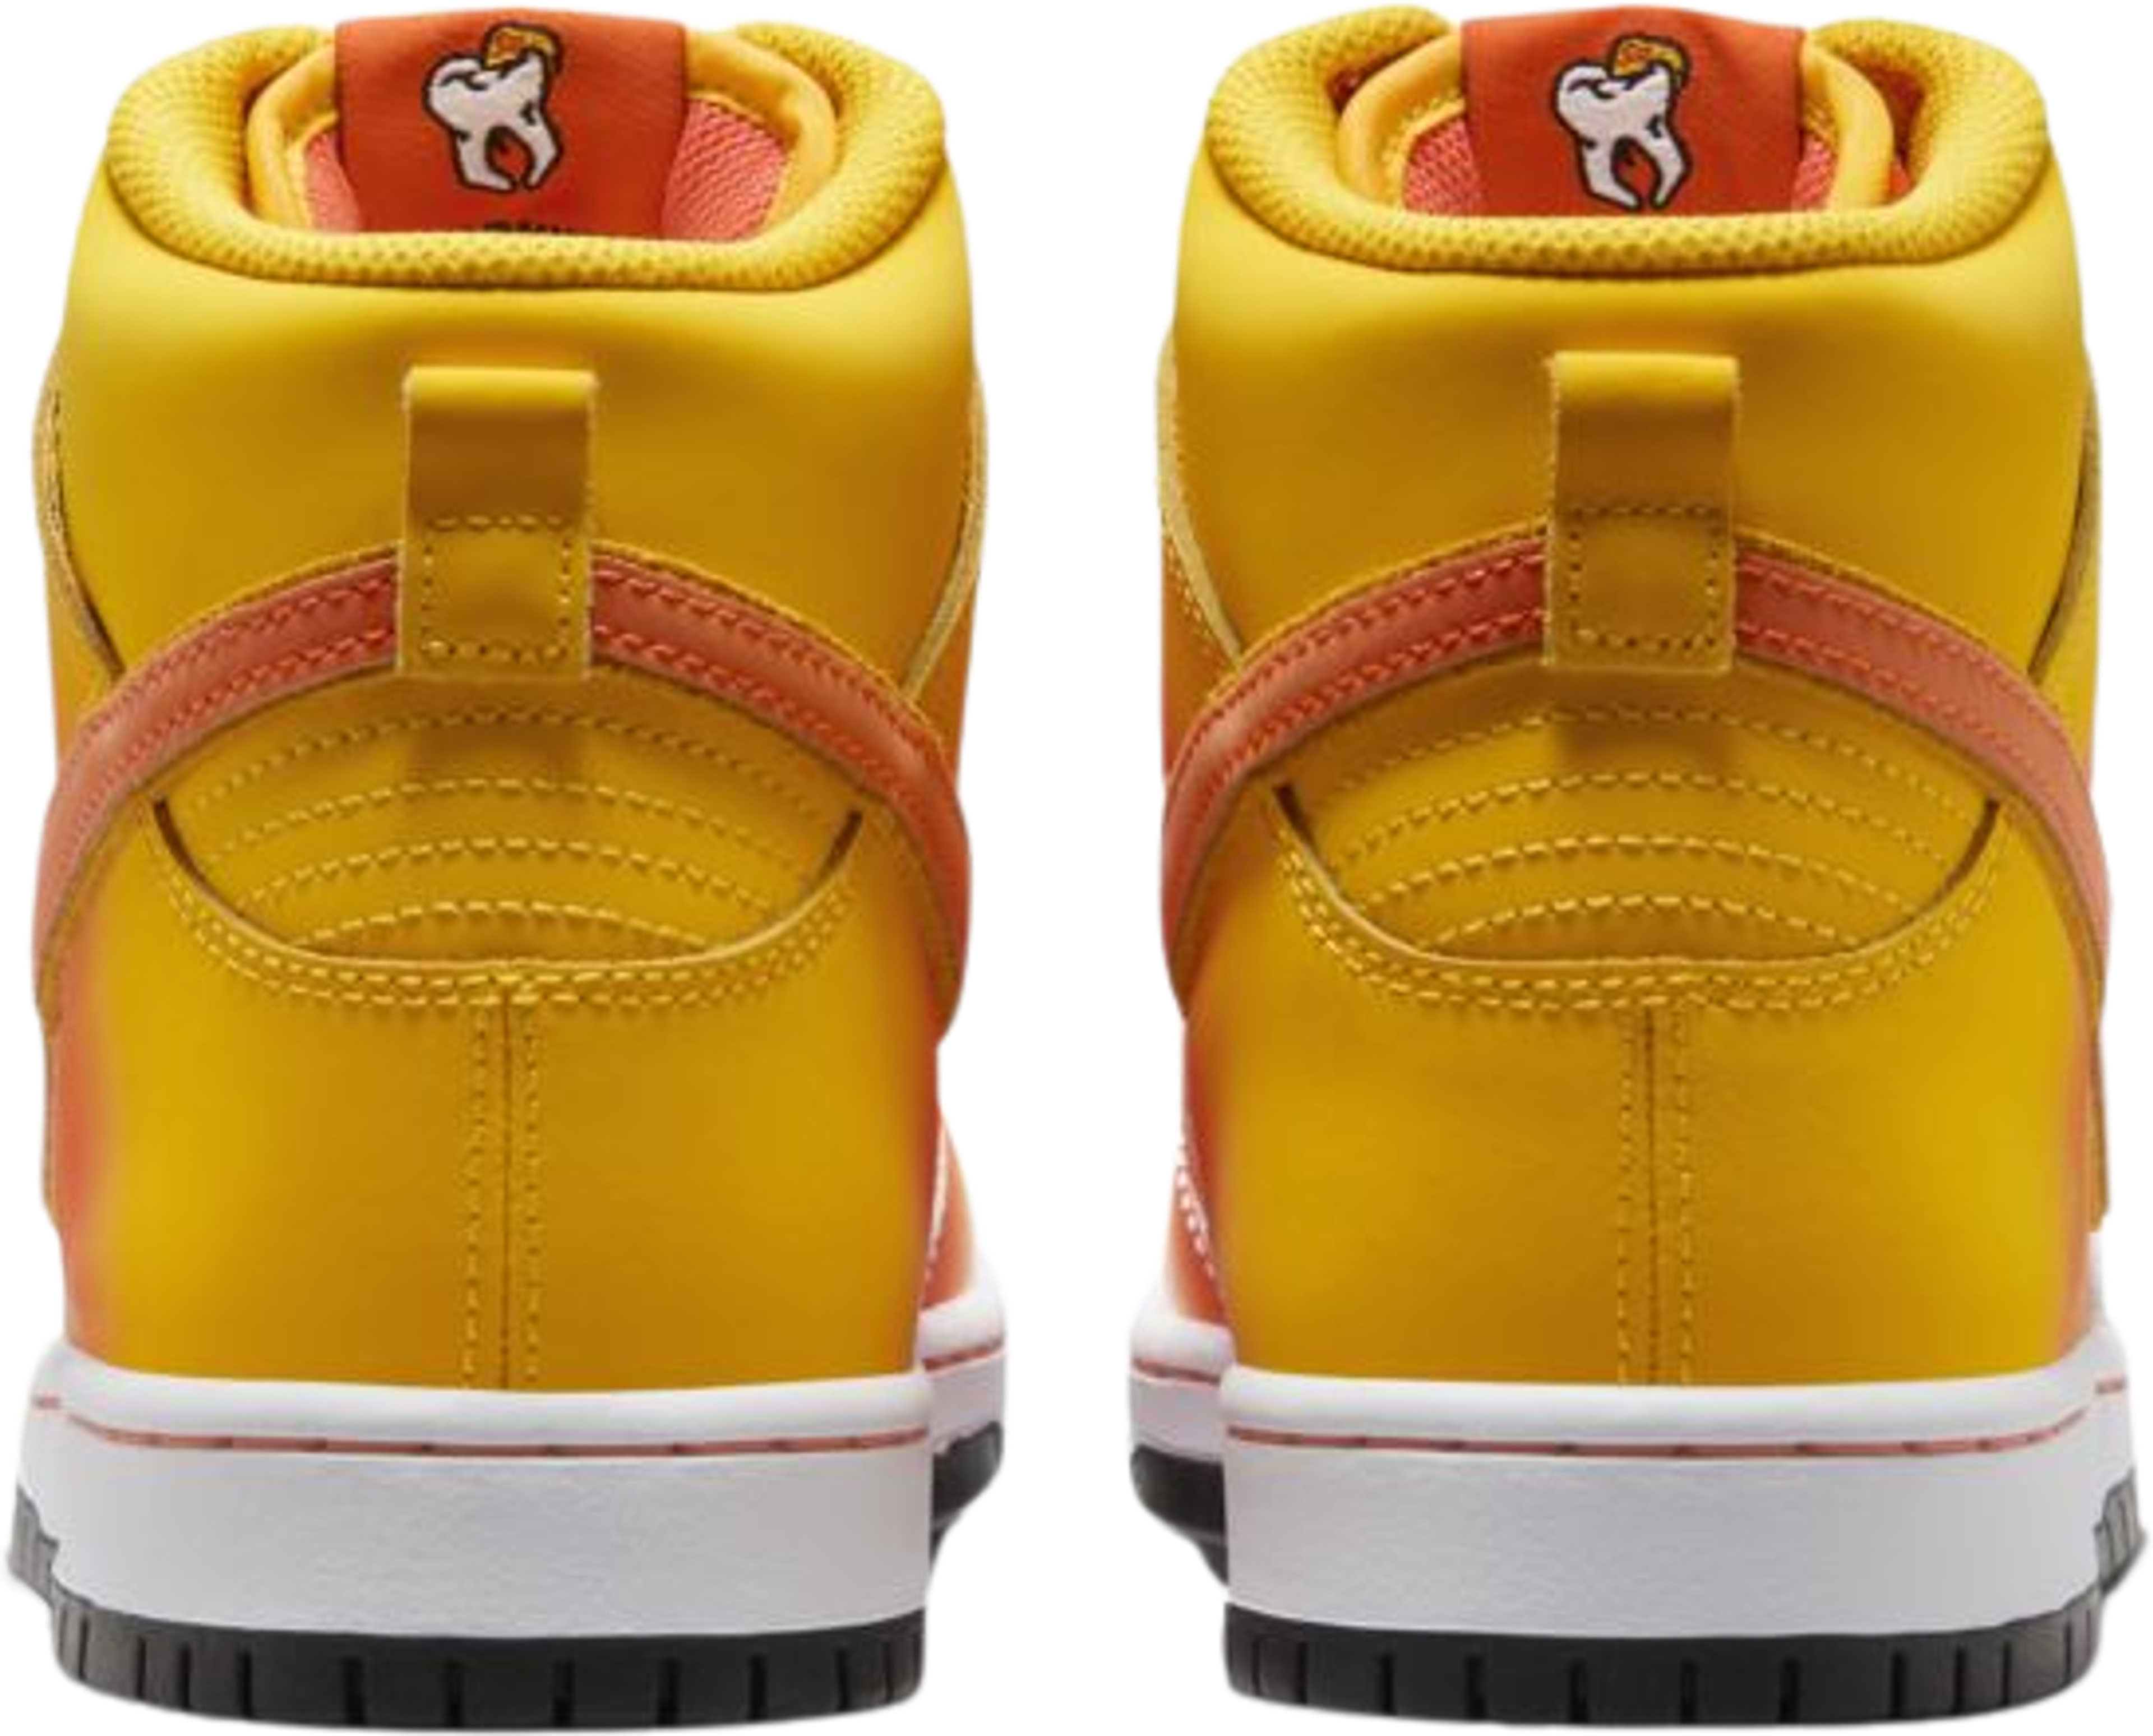 Nike SB Dunk High Sweet Tooth Candy Corn | Release Information